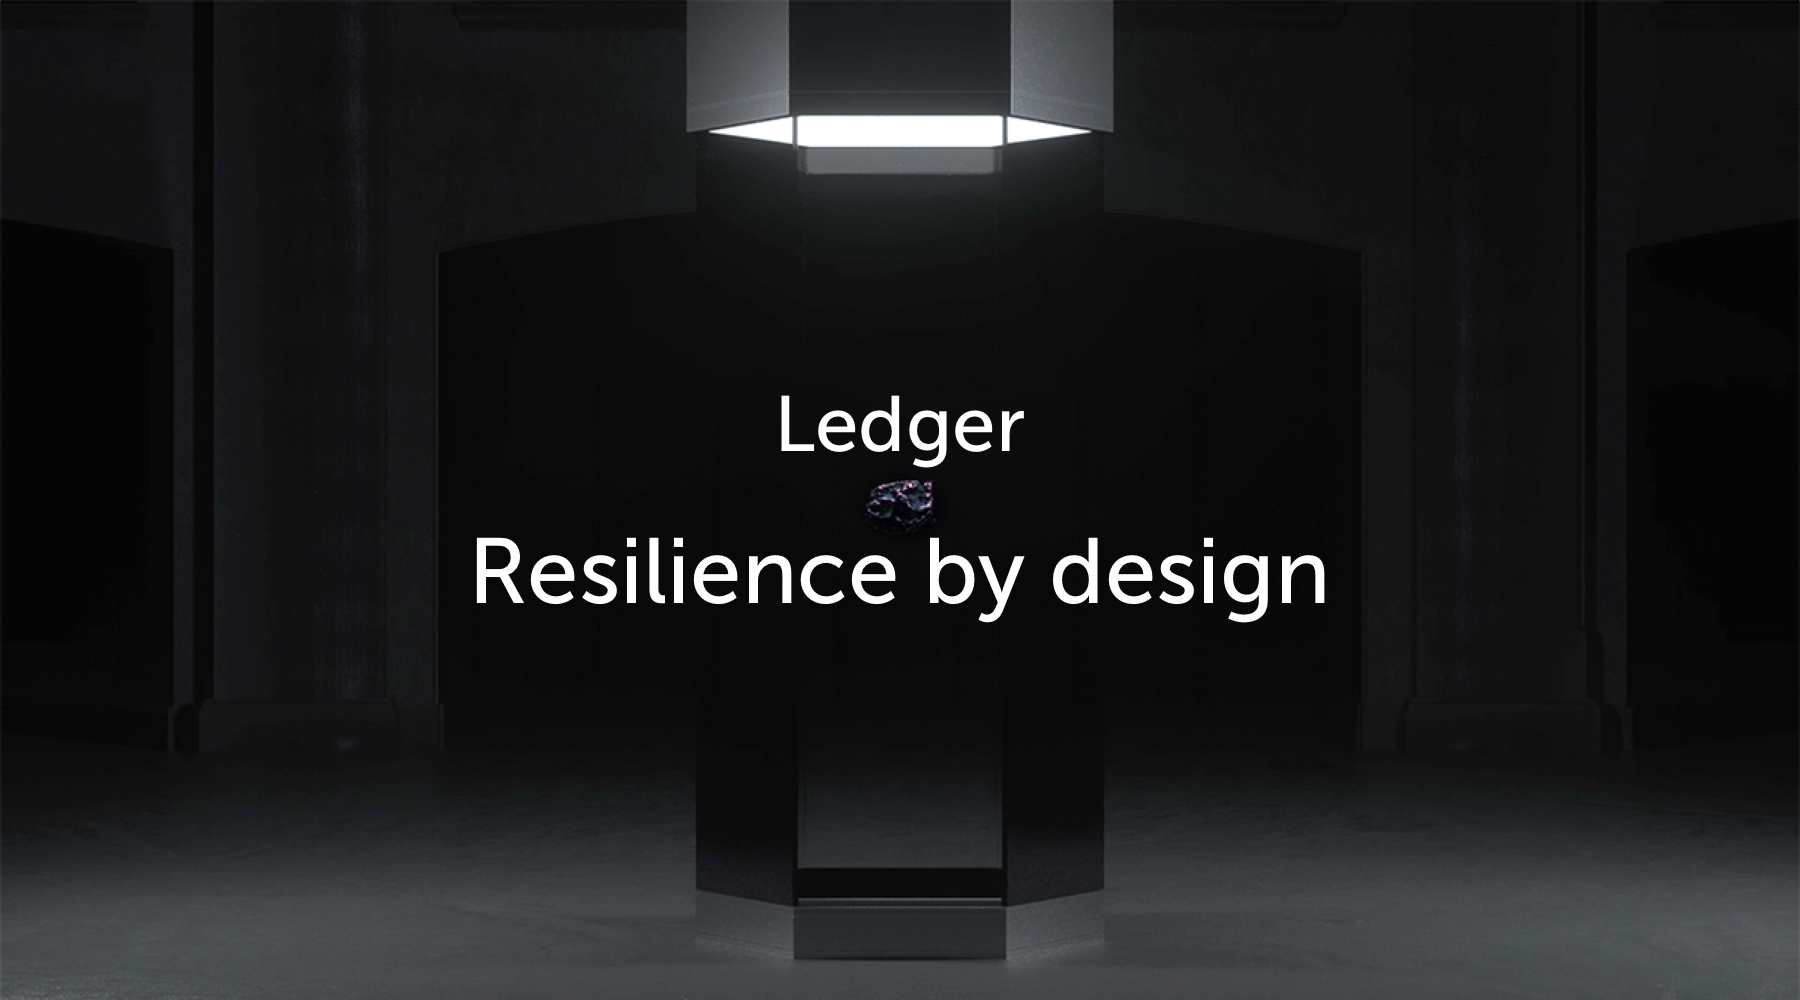 We Are Ledger: A Brand Vision